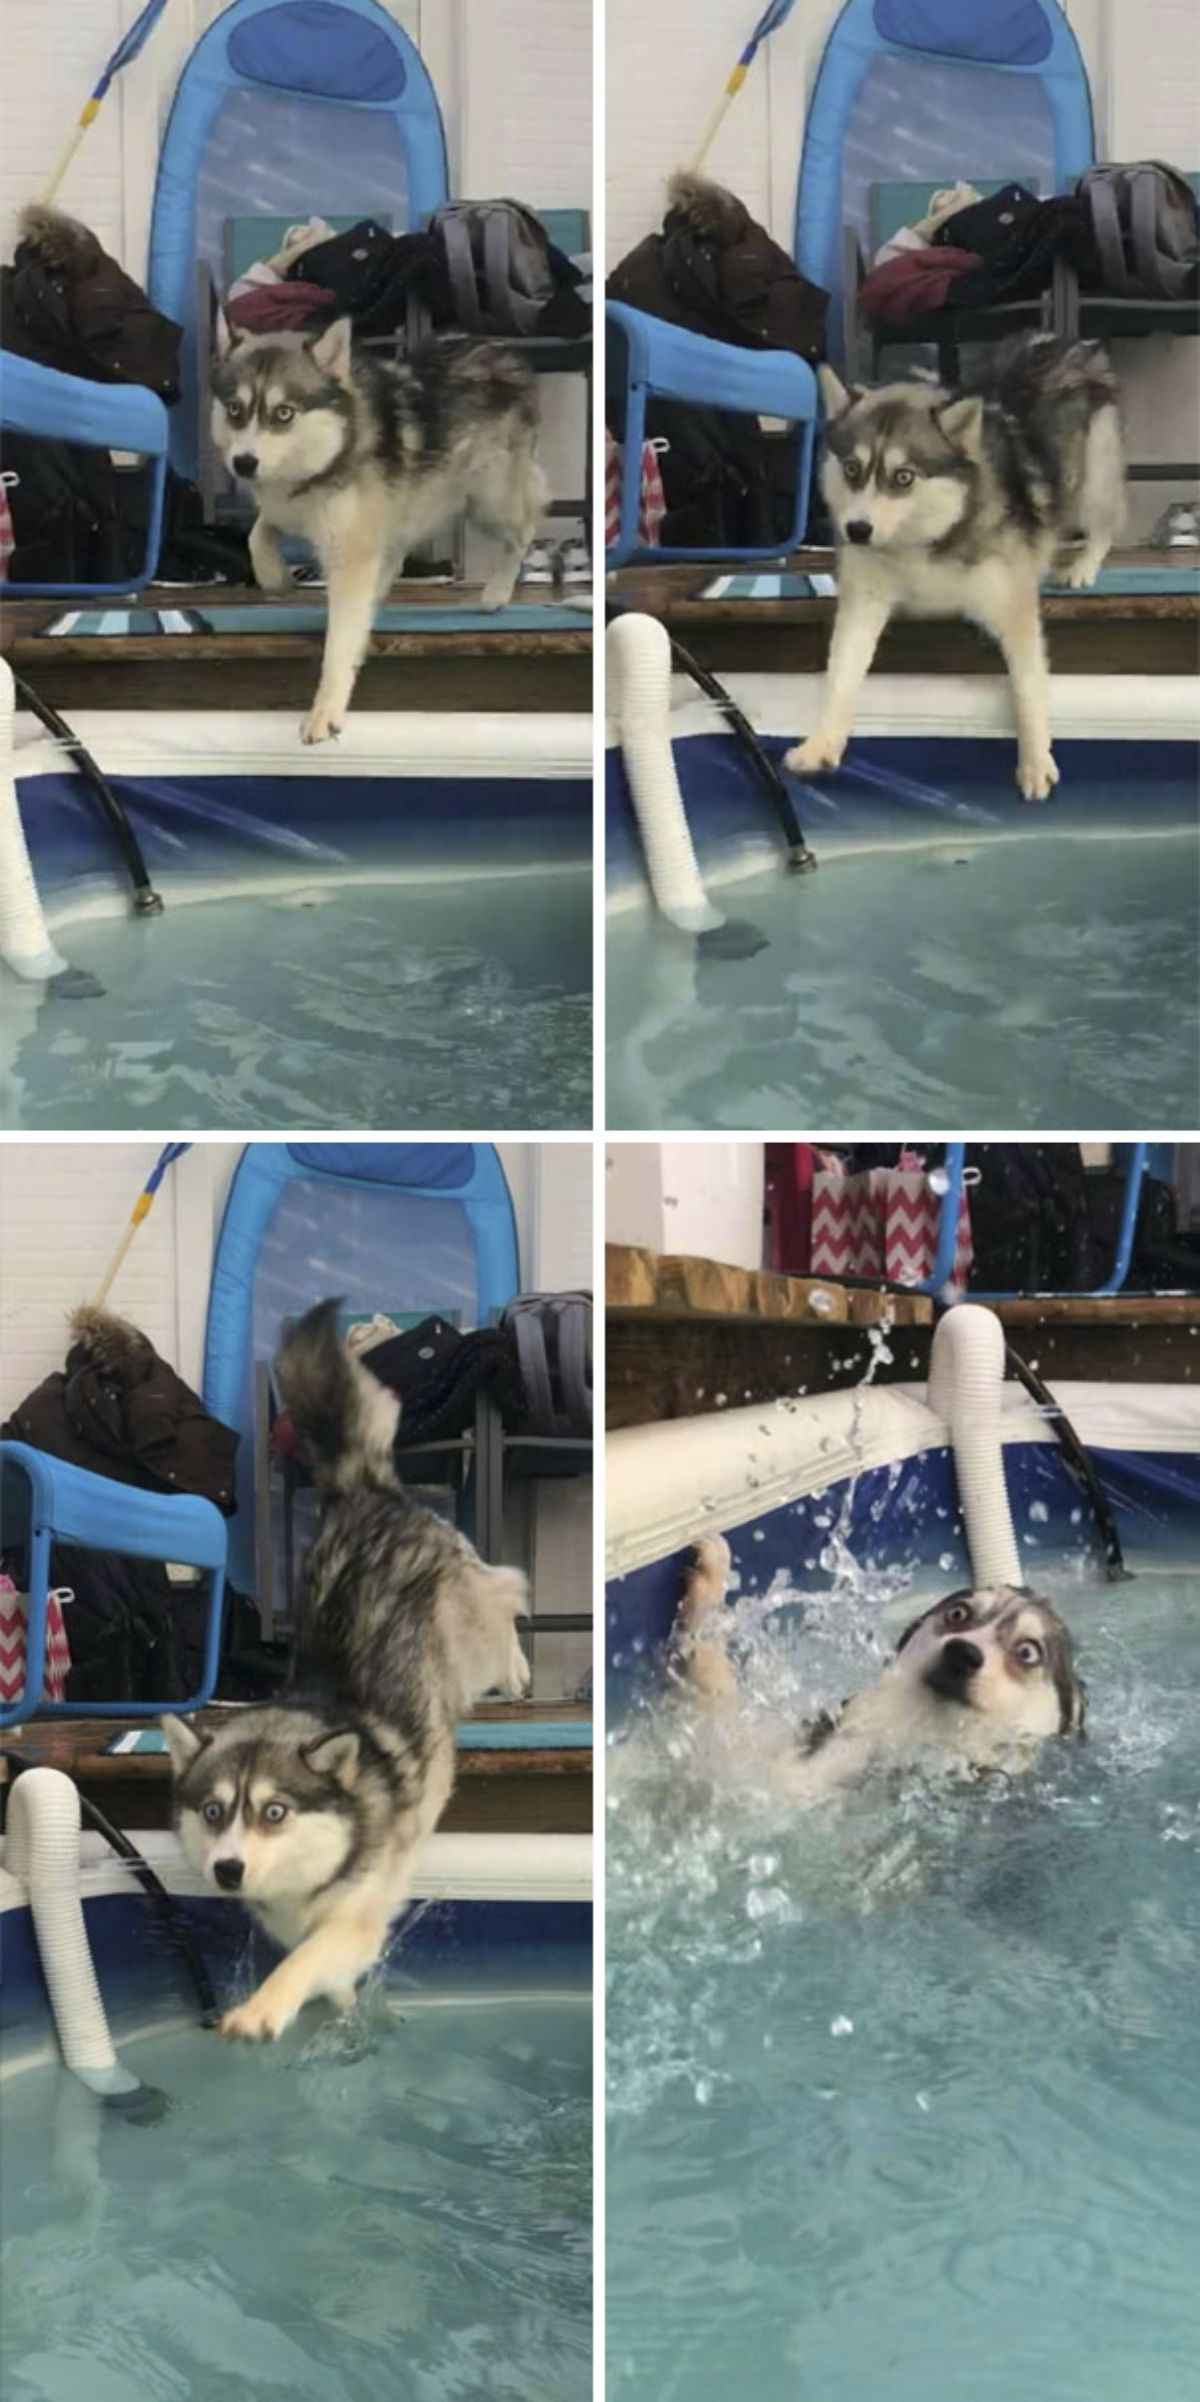 4 photos of a black and white husky falling into a swimming pool